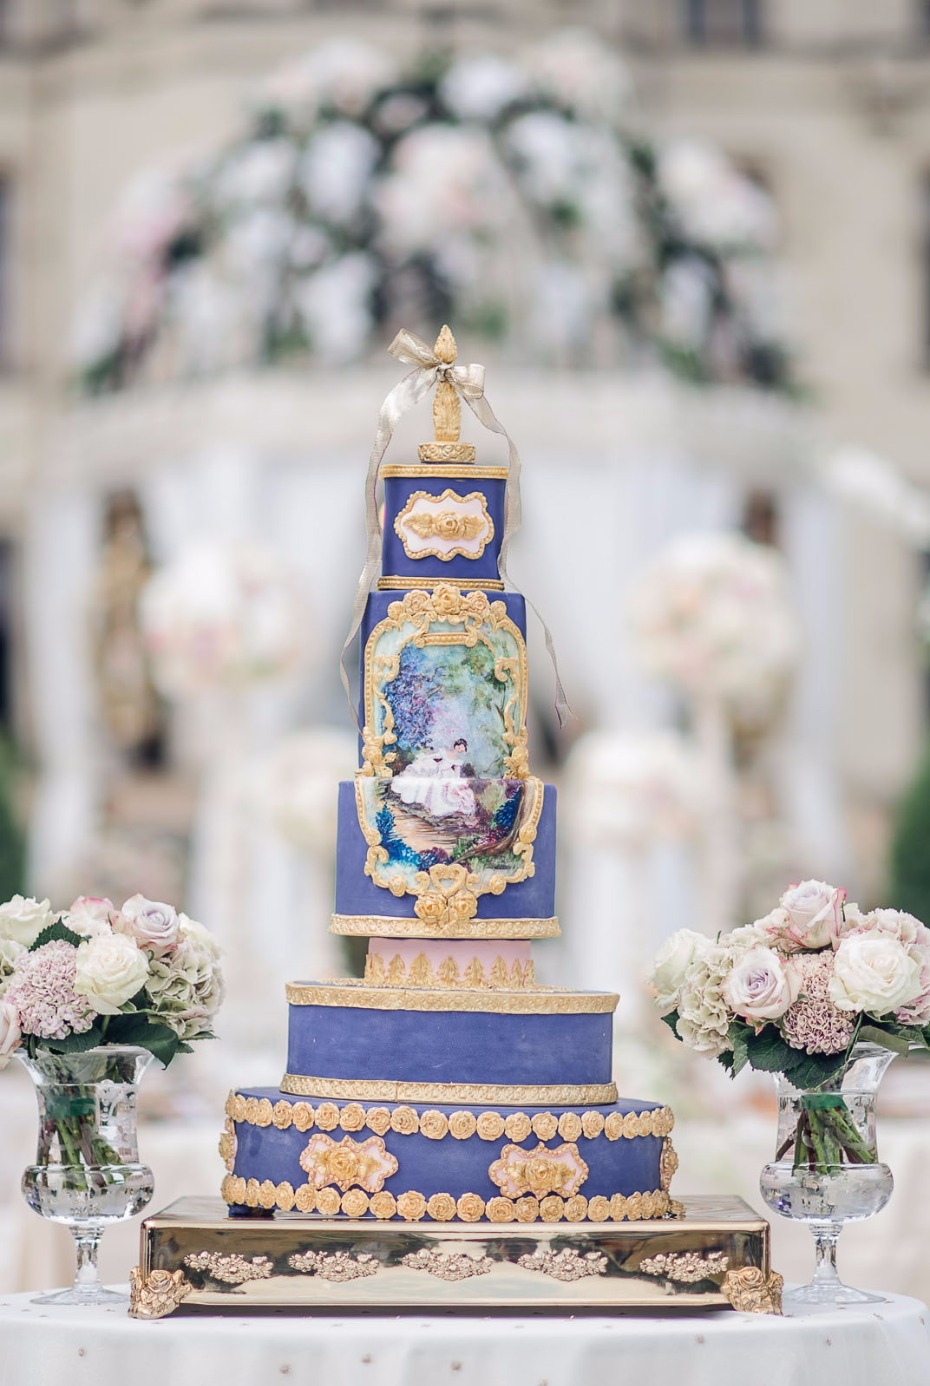 storybook fantasy wedding cake in purple and gold